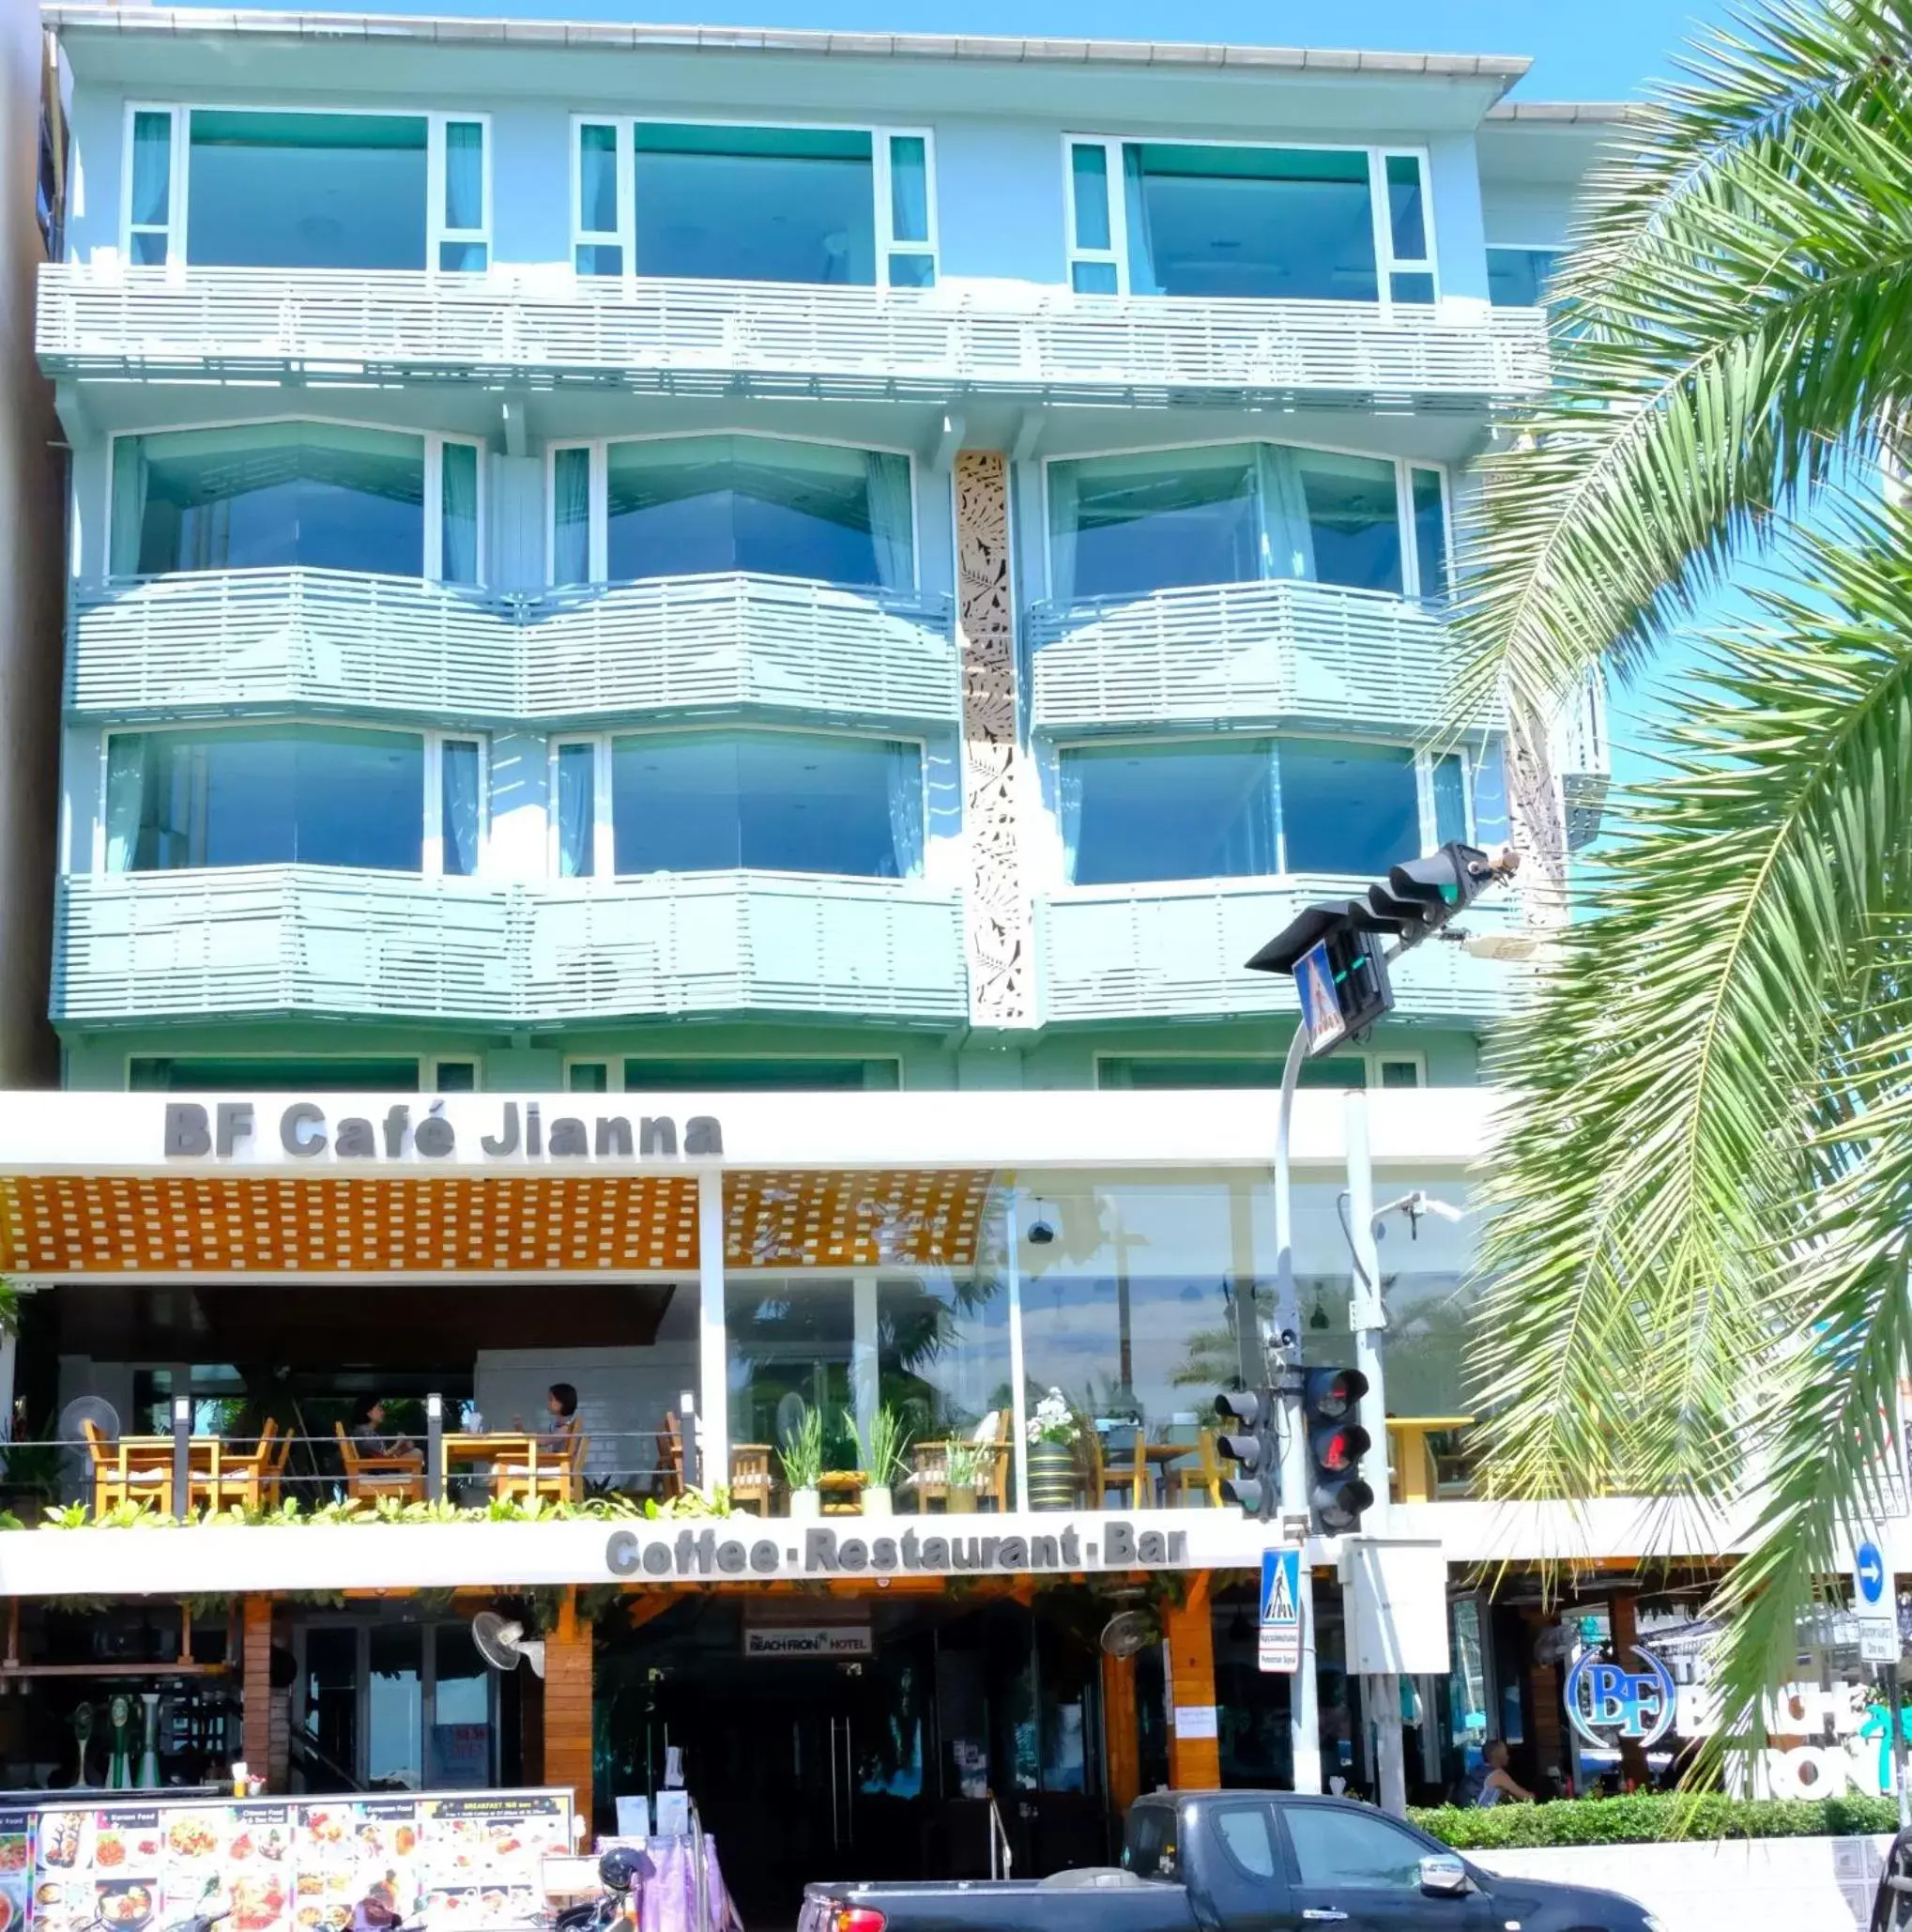 Property Building in The Beach Front Resort, Pattaya